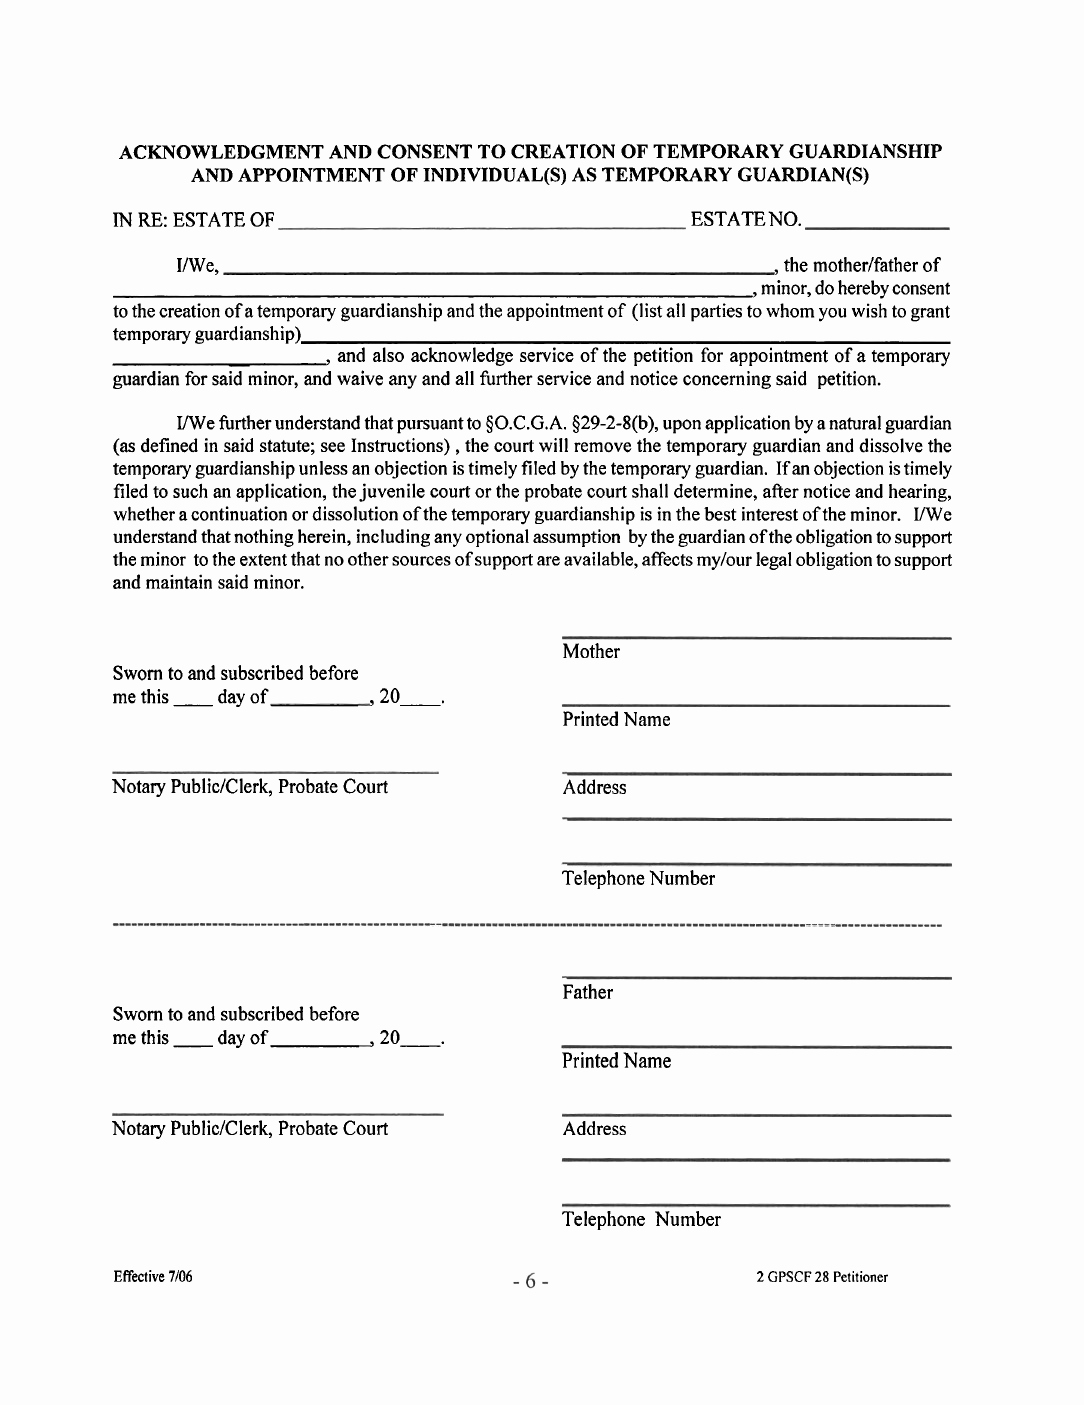 Free Printable Legal Guardianship forms Awesome Free Temporary Guardianship Letter Template Sample